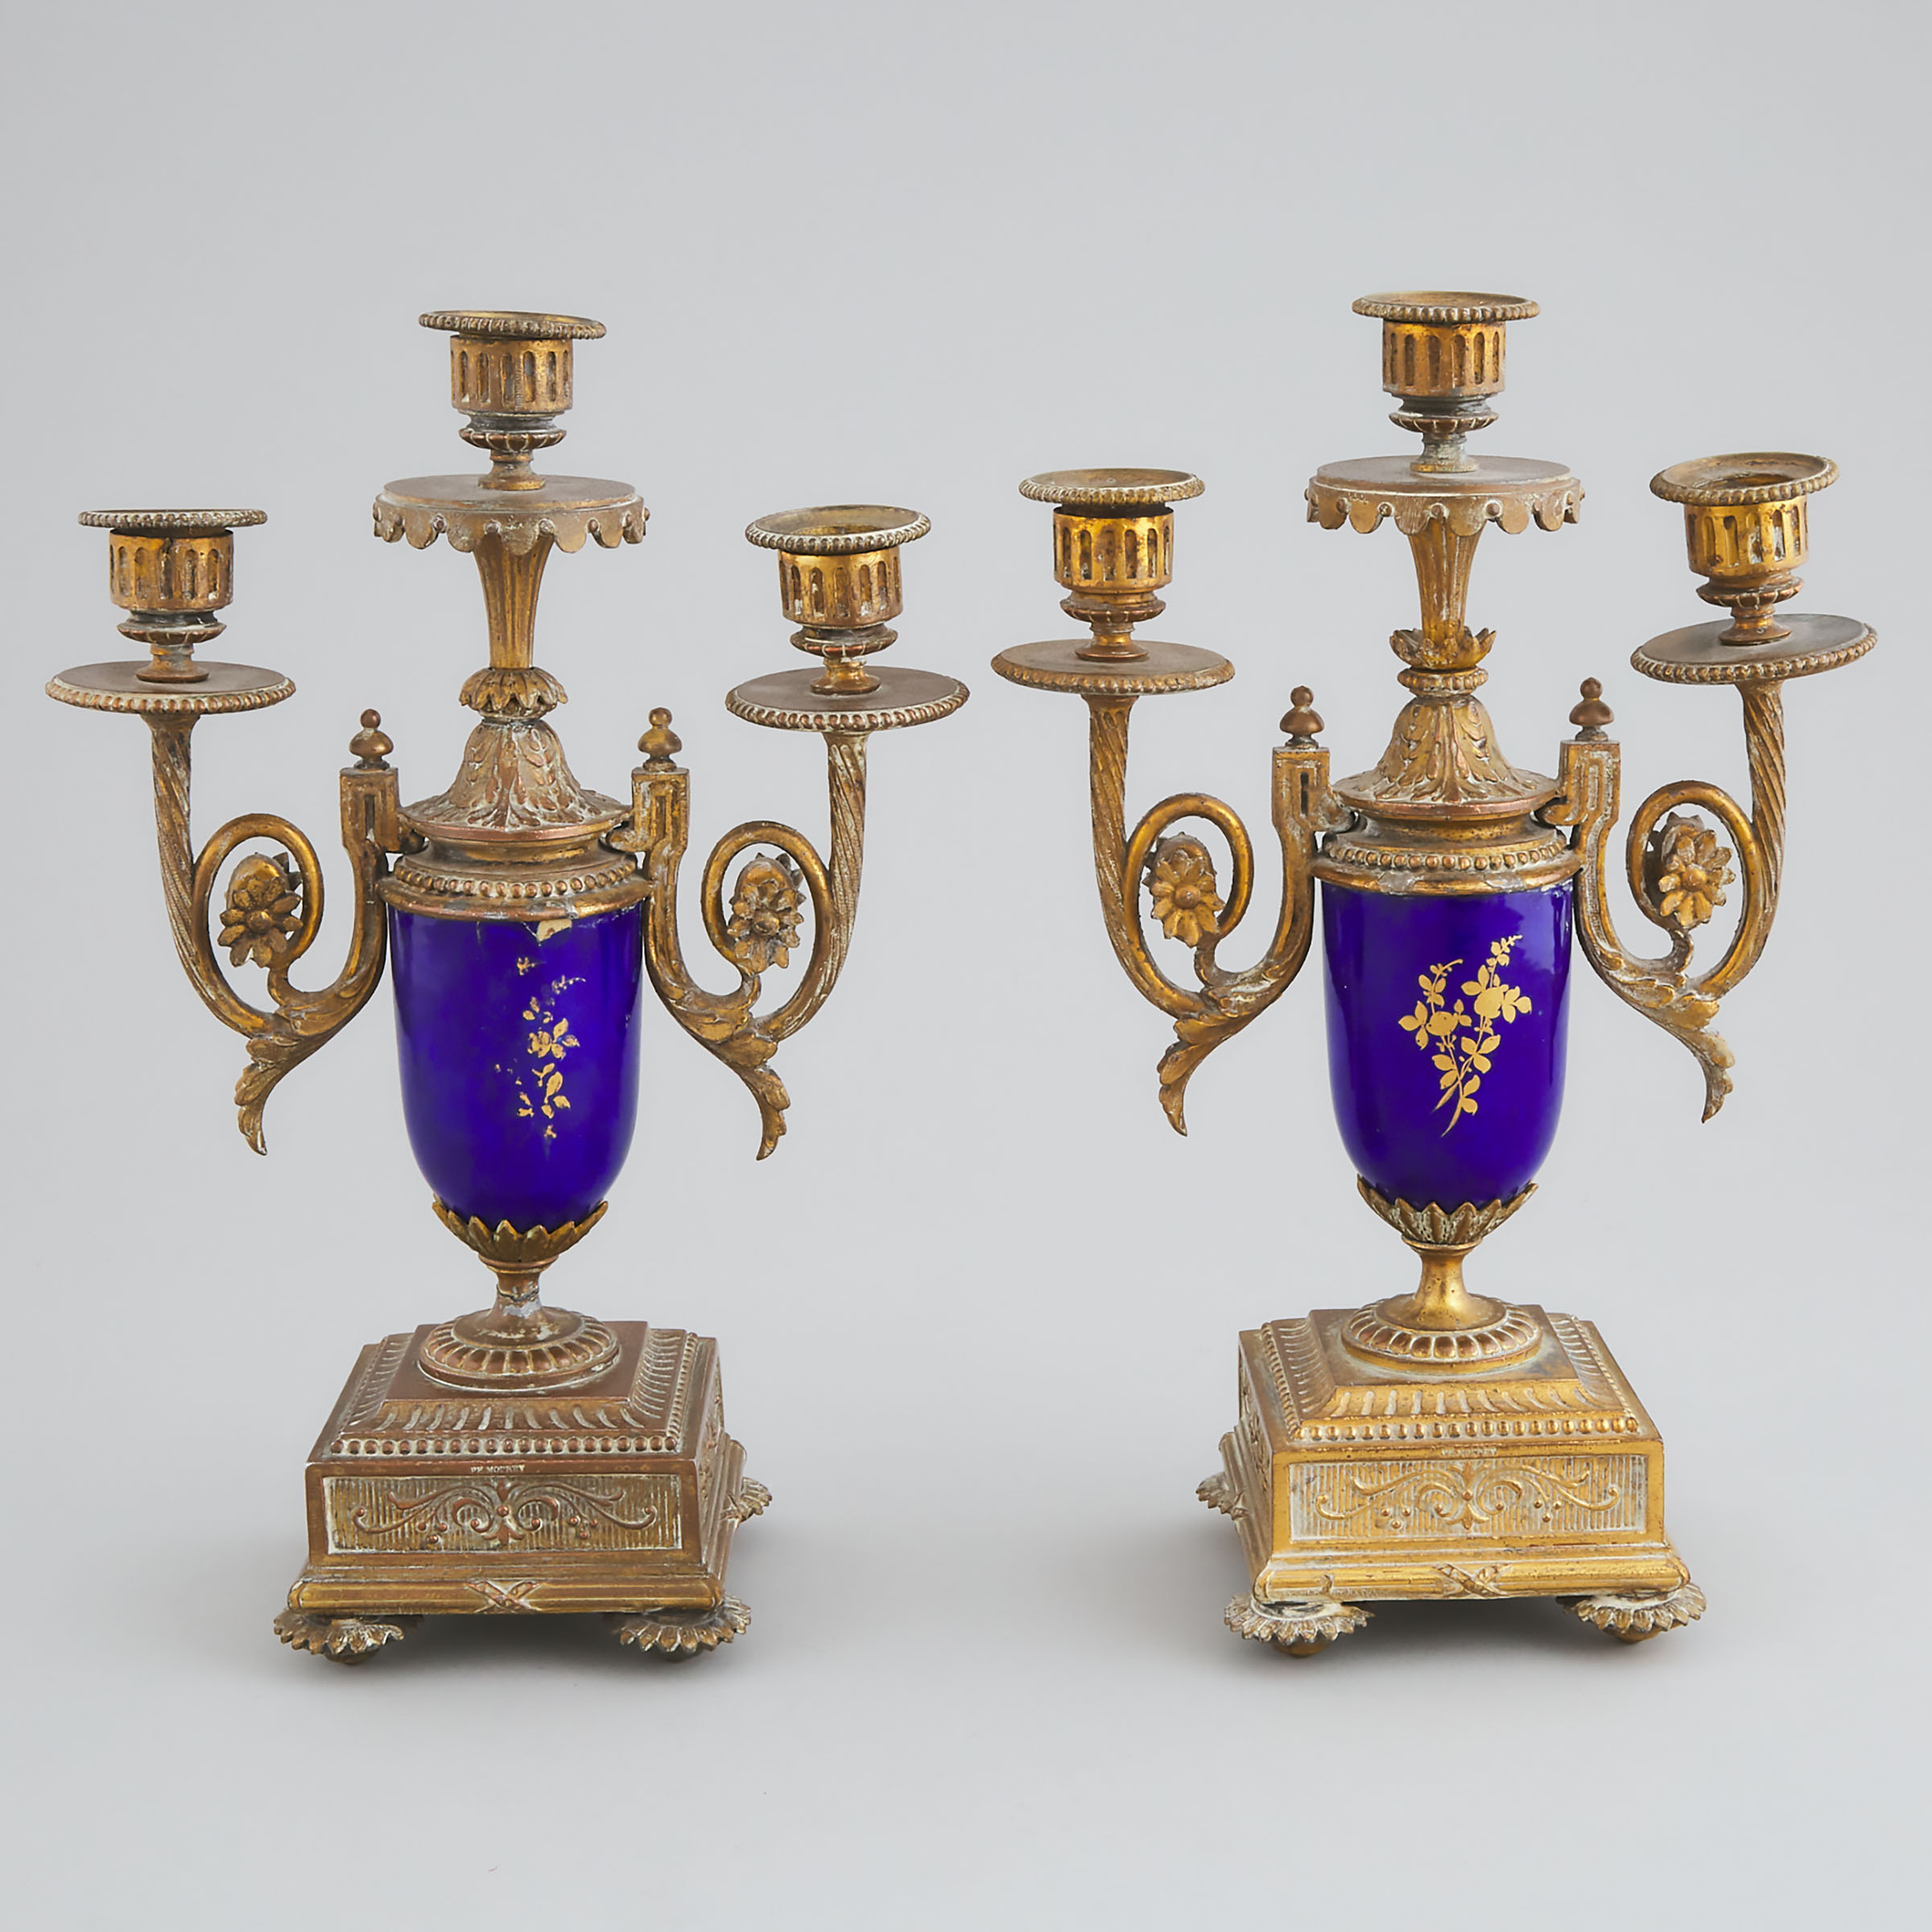 Pair of Louis XVI Style 'Sèvres' Porcelain Mounted Candelabras, late 19th century